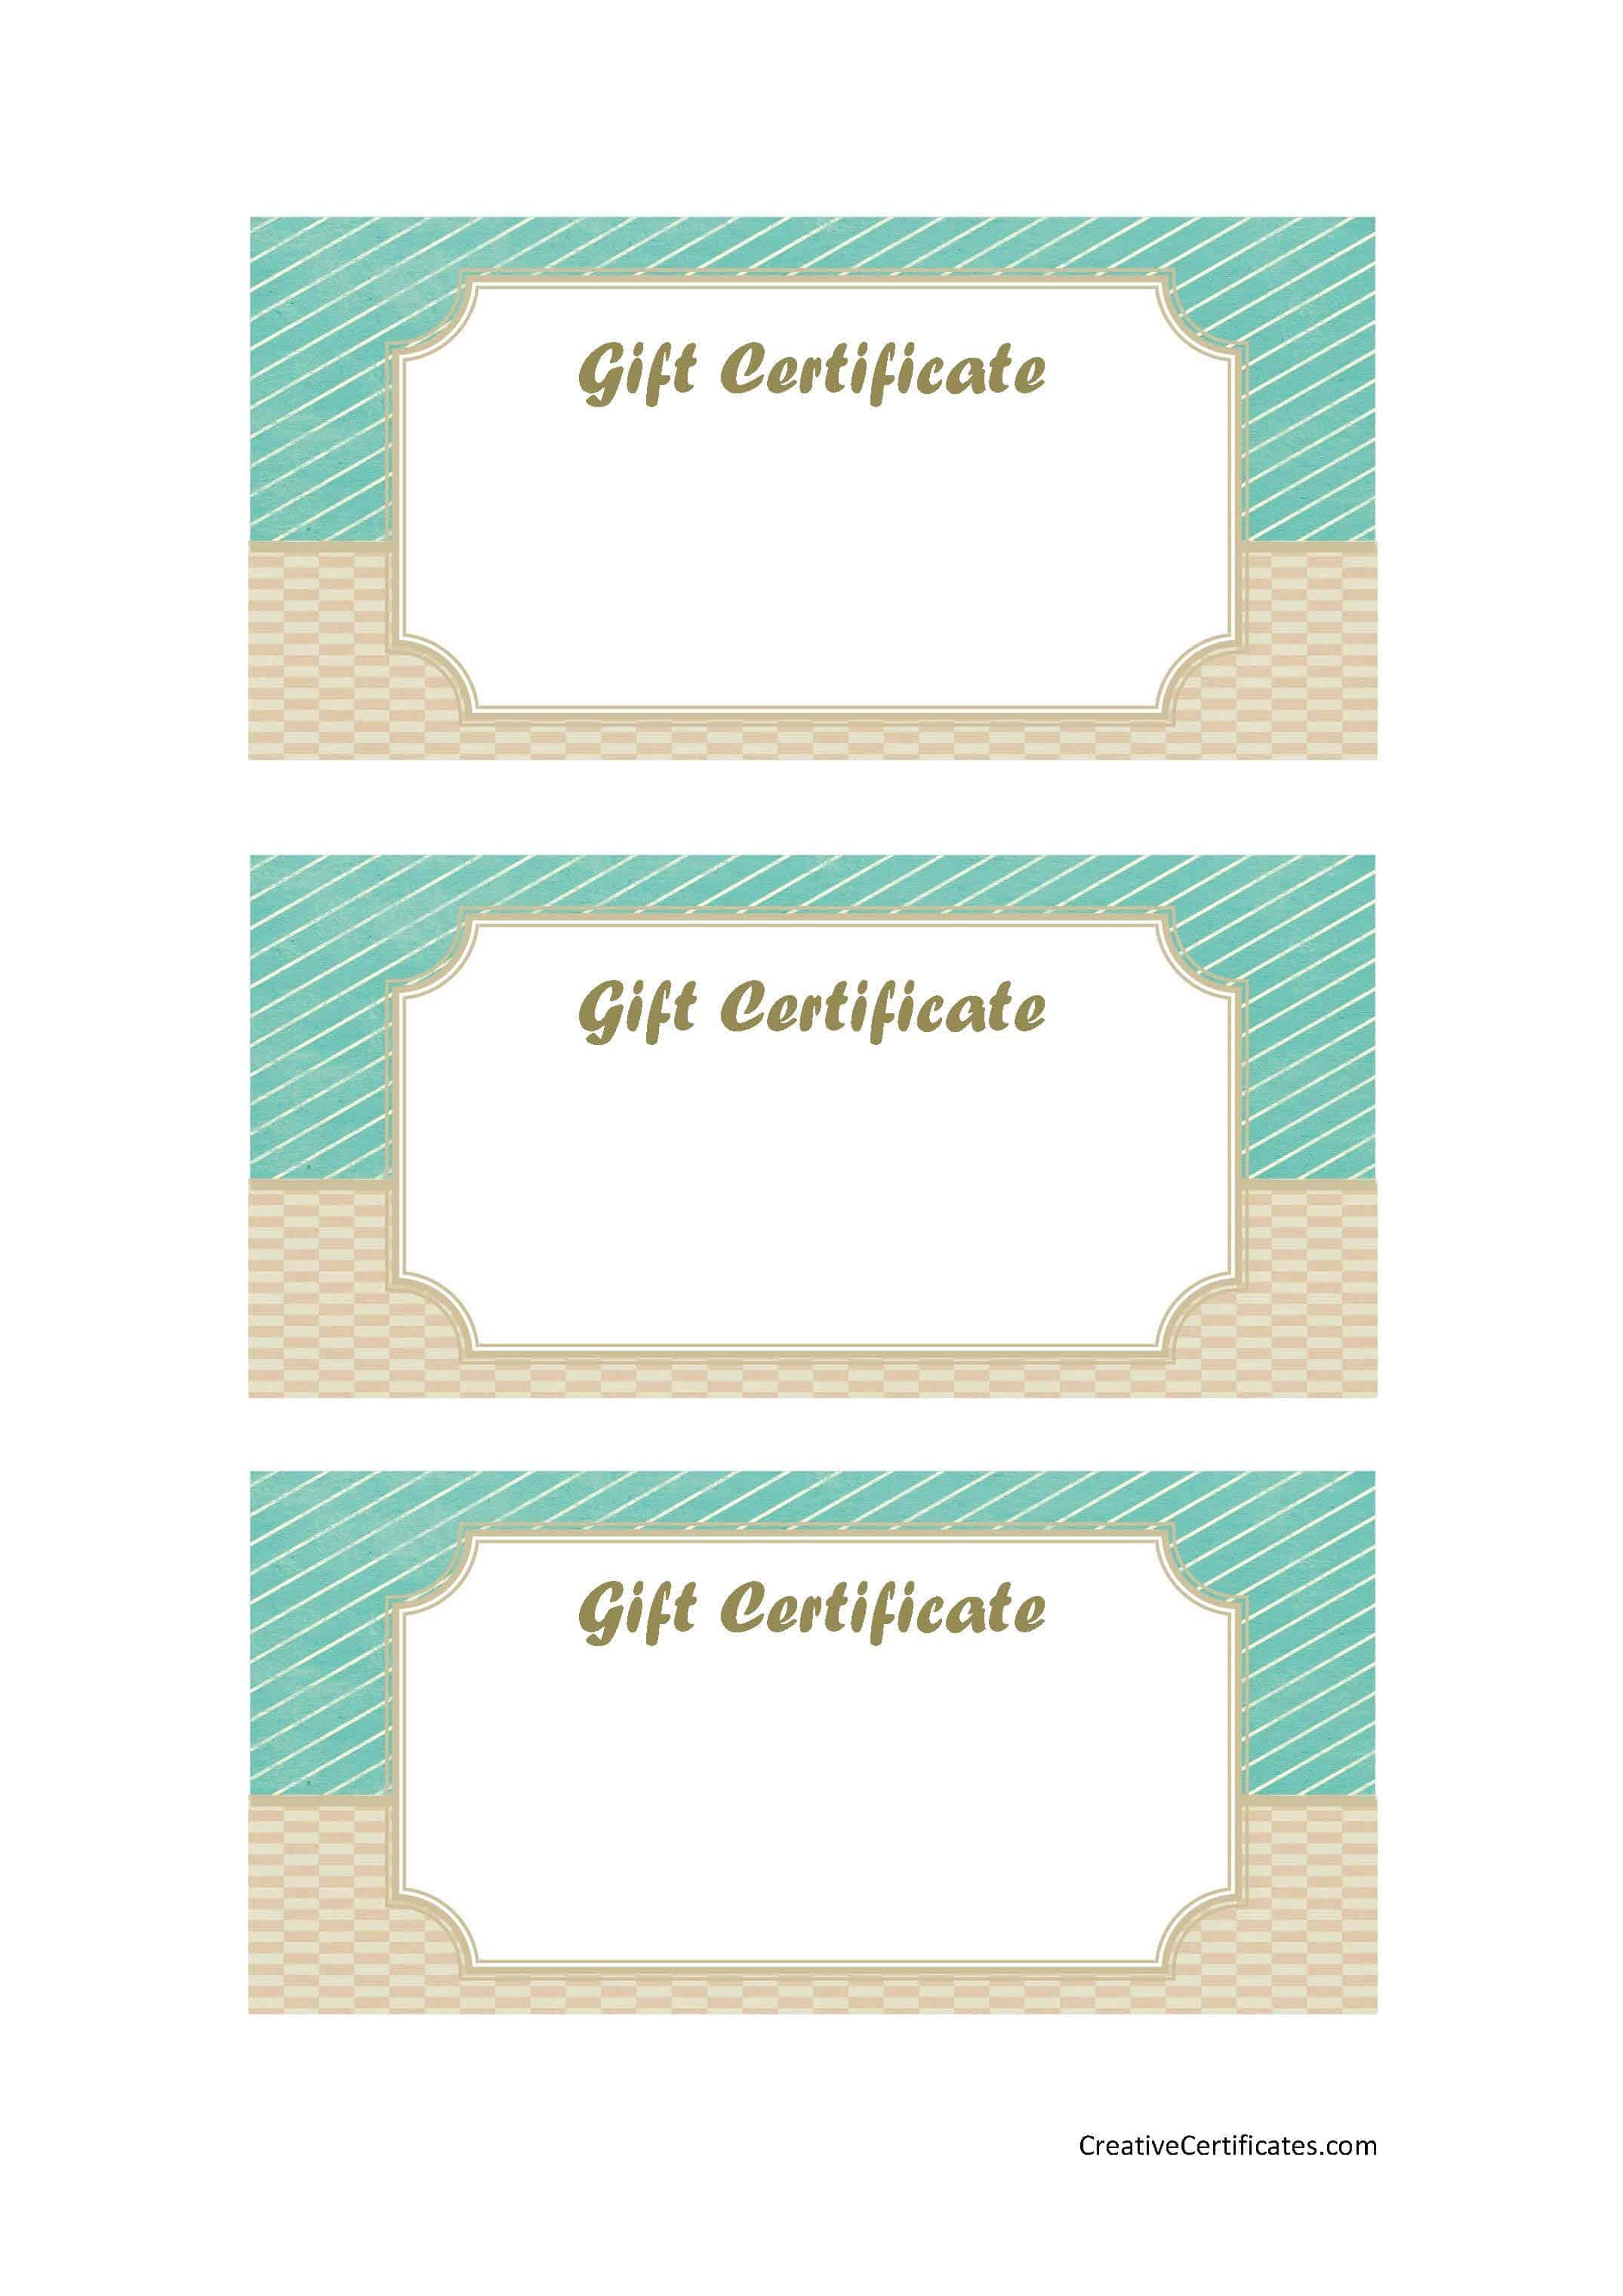 FREE Gift Certificate Template 50+ Designs Customize Online and Print